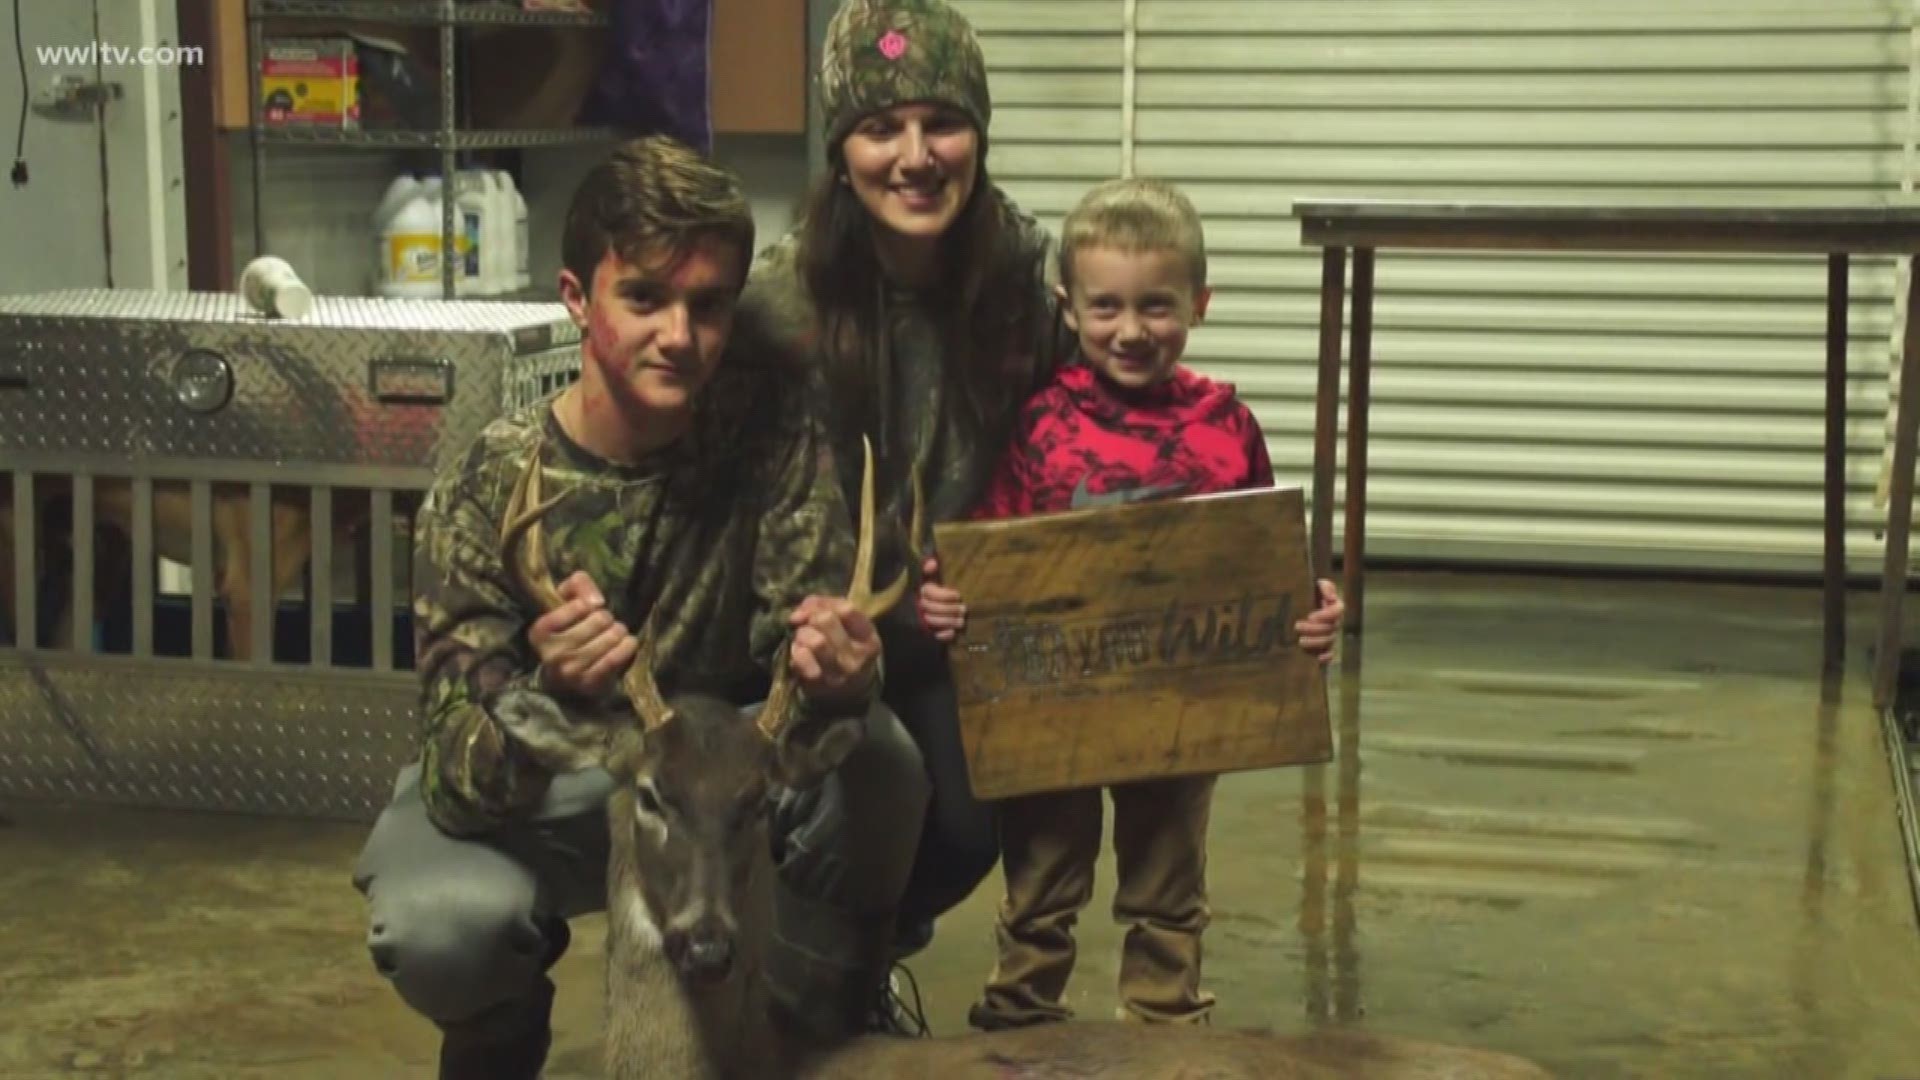 Generous donors help a military family & the son of a Navy captain stationed overseas enjoy a hunting trip. Don Dubuc reports in the Fish & Game report.